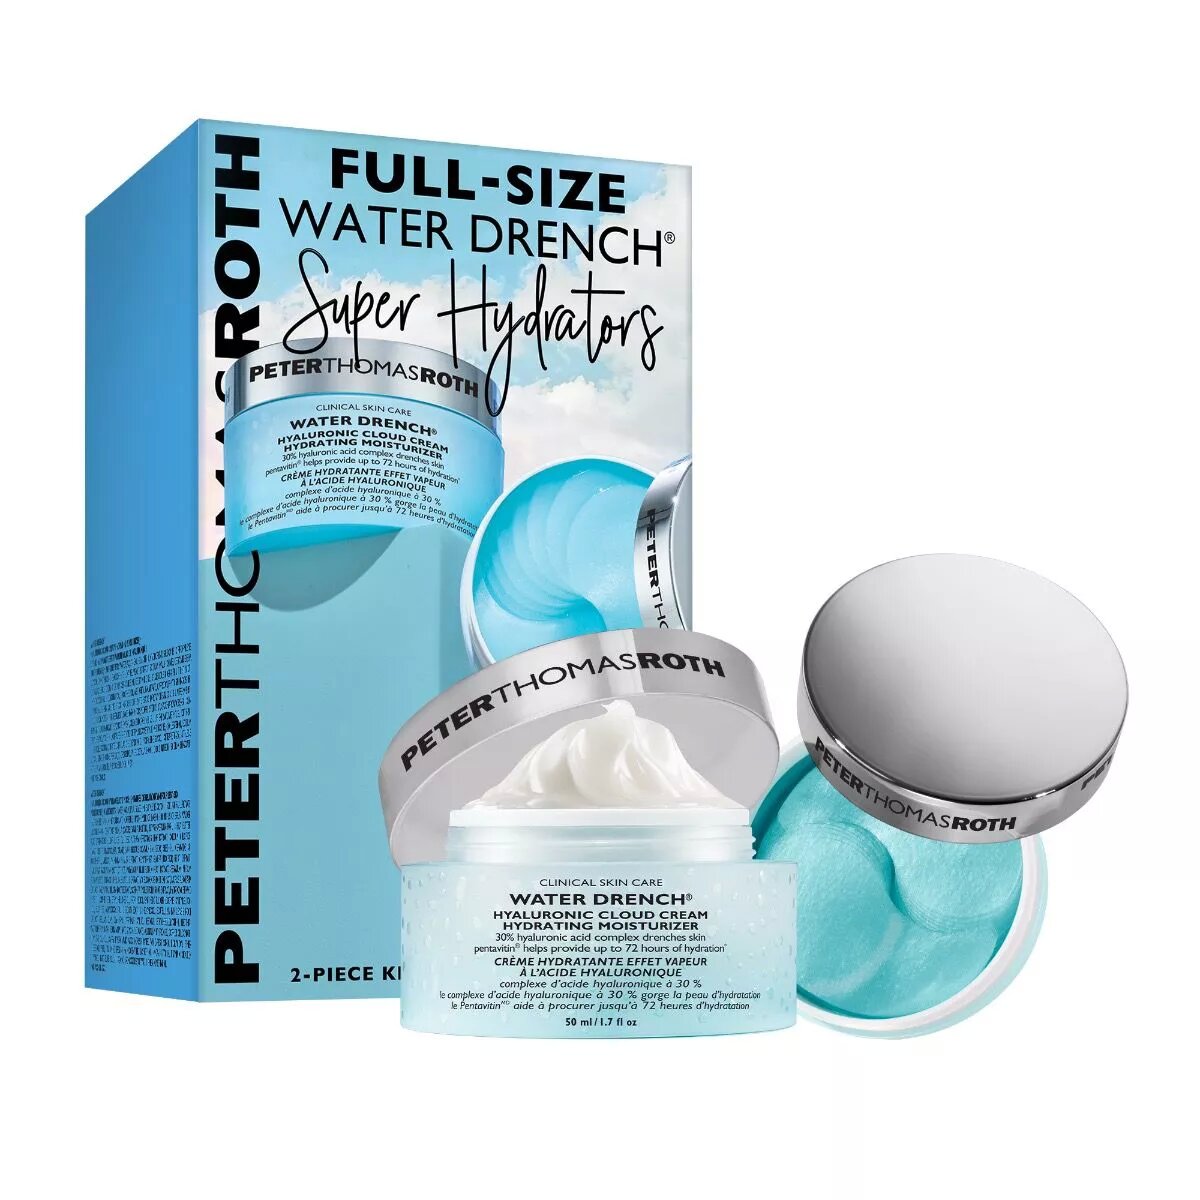 Peter Thomas Roth Full-Size Water Drench Super Hydrators 2-Piece Kit - New , Sealed, in the Box